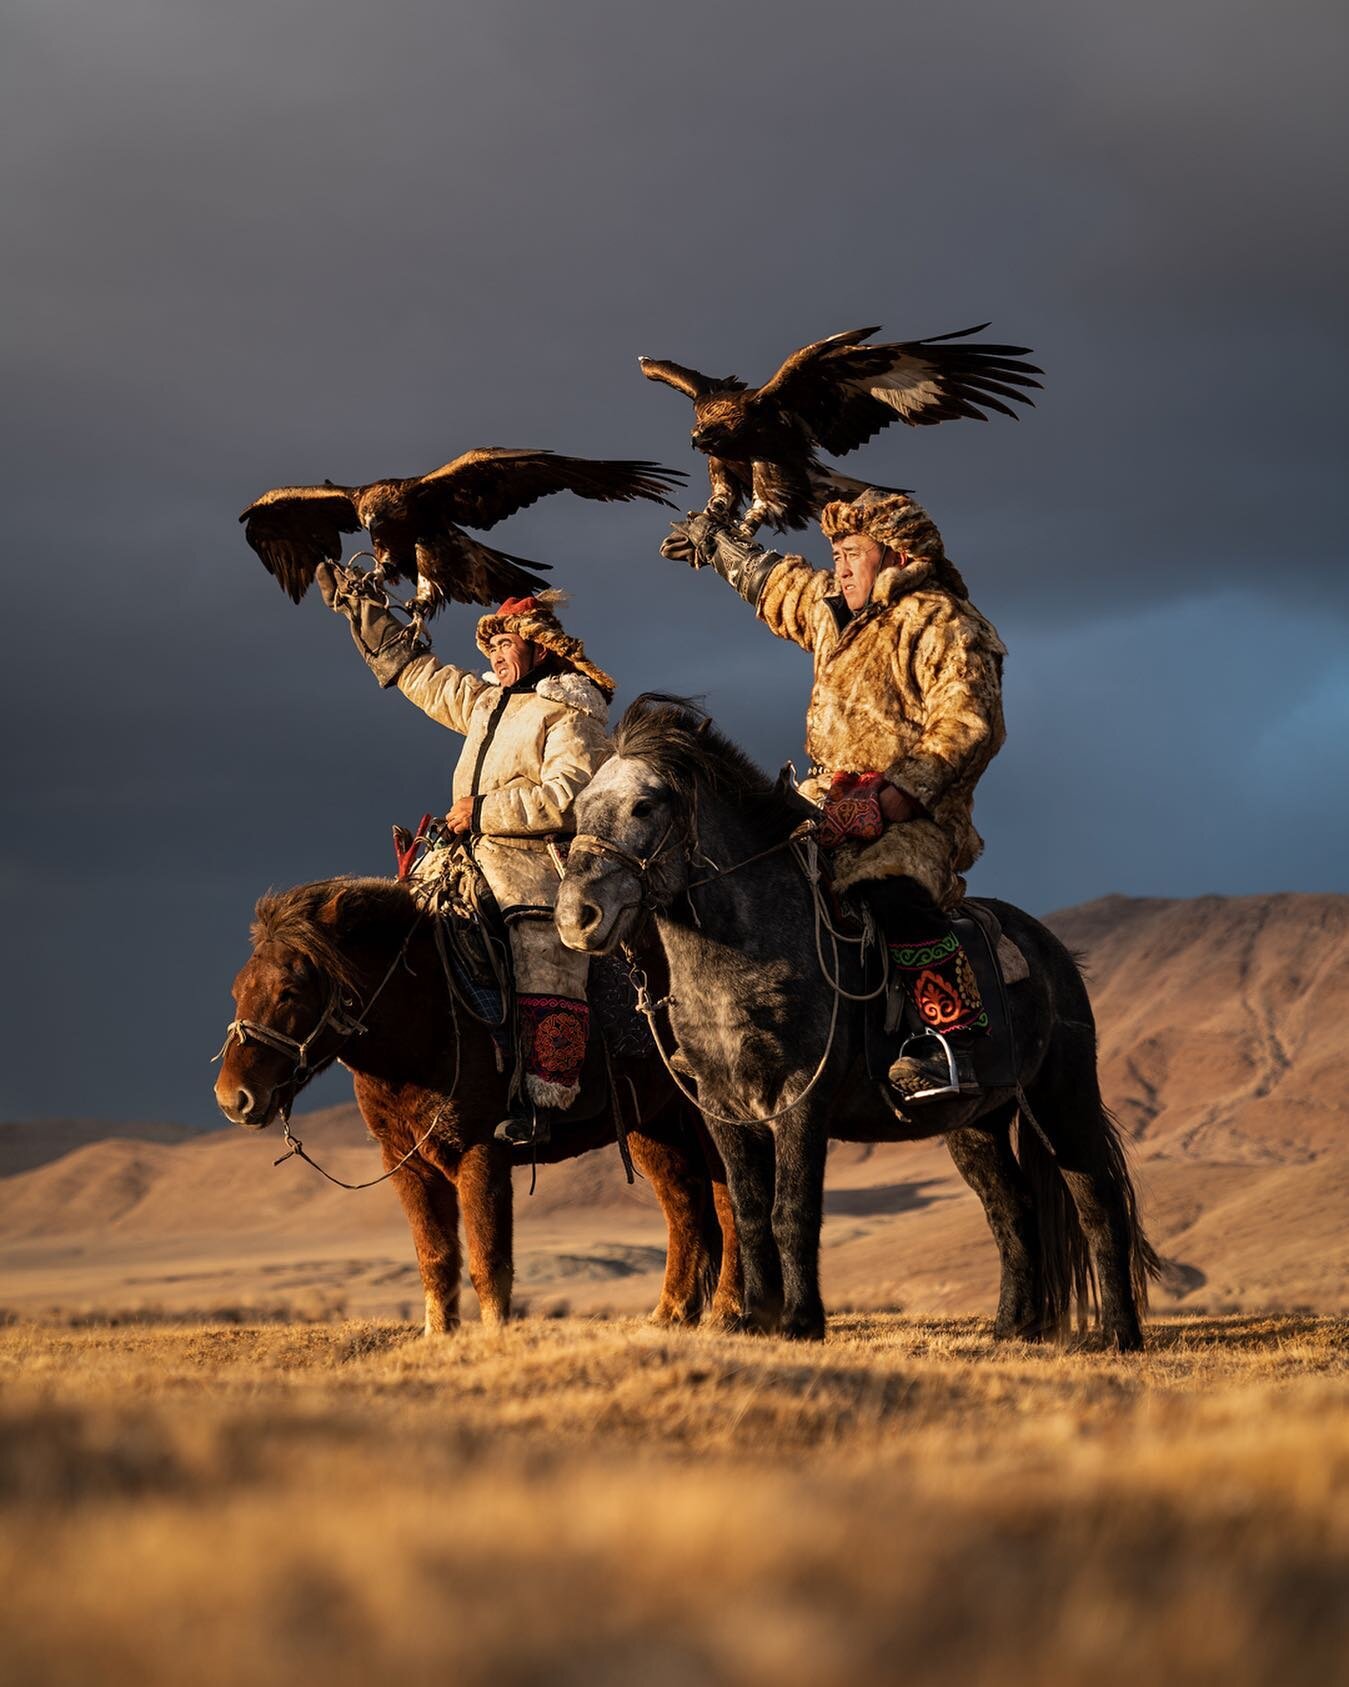 ⁣Let me present you to Arman and Talap, the Eagle Hunters siblings living in the remote Sagsai province in Western Mongolia, hunting small prey like rabbits, marmots, and foxes with their golden eagles.⠀
⠀
I wonder when will things get back to what t